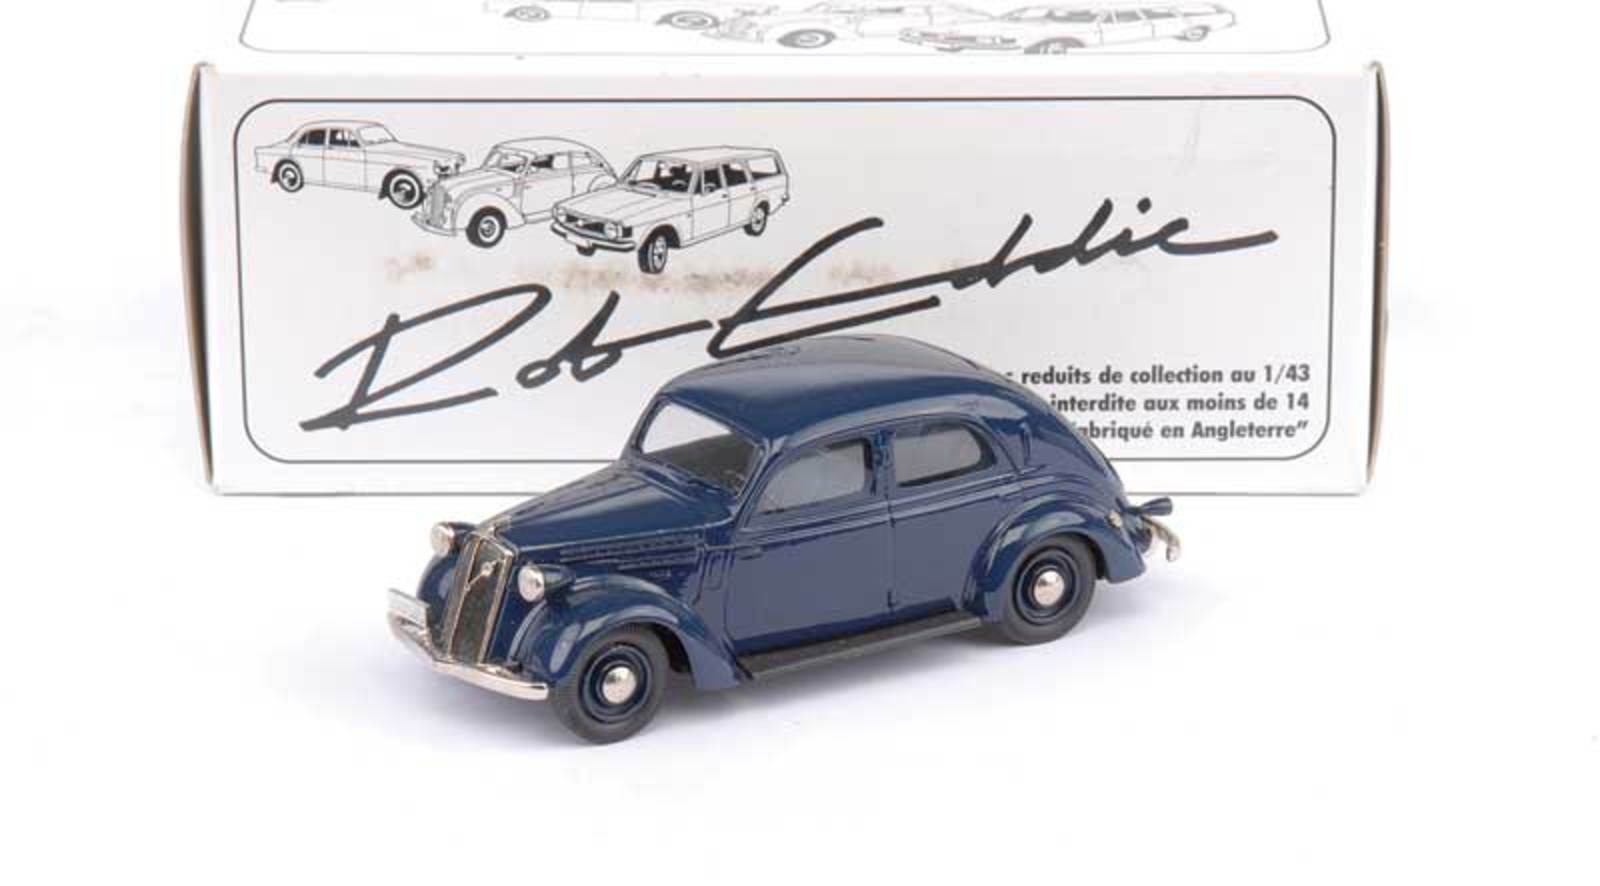 RE18 1937 Volvo PV51 - very dark blue, pale blue interior - Mint in later